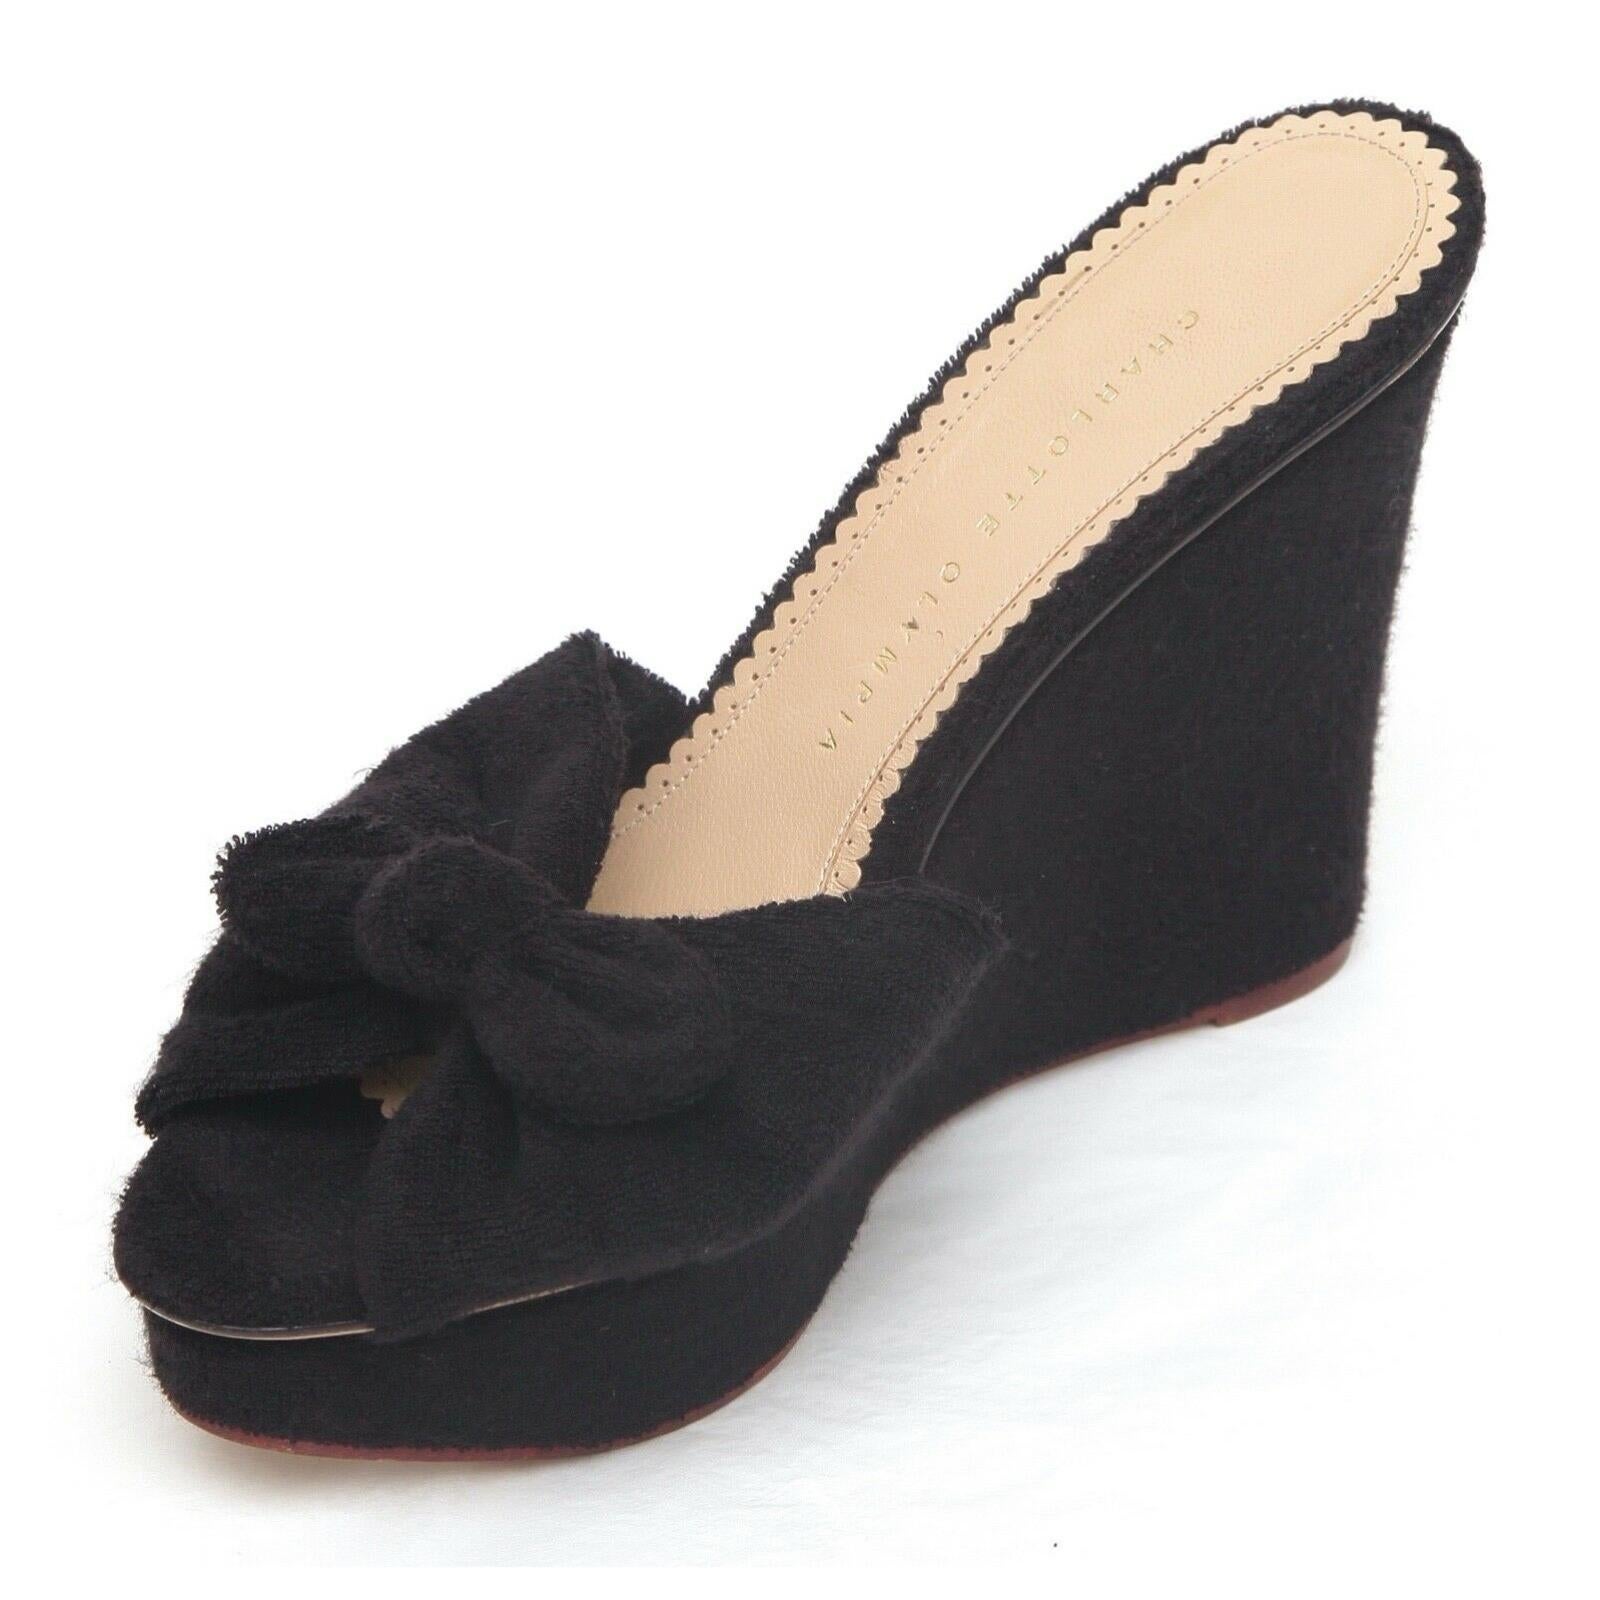 GUARANTEED AUTHENTIC CHARLOTTE OLYMPIA BLACK TERRY CLOTH WEDGE SANDALS

Design:
- Black terry cloth upper.
- Bow at vamp.
- Terry covered platform and wedge.
- Leather lining and sole.

Size: 38.5

Measurements (Approximate):
- Insole, 10